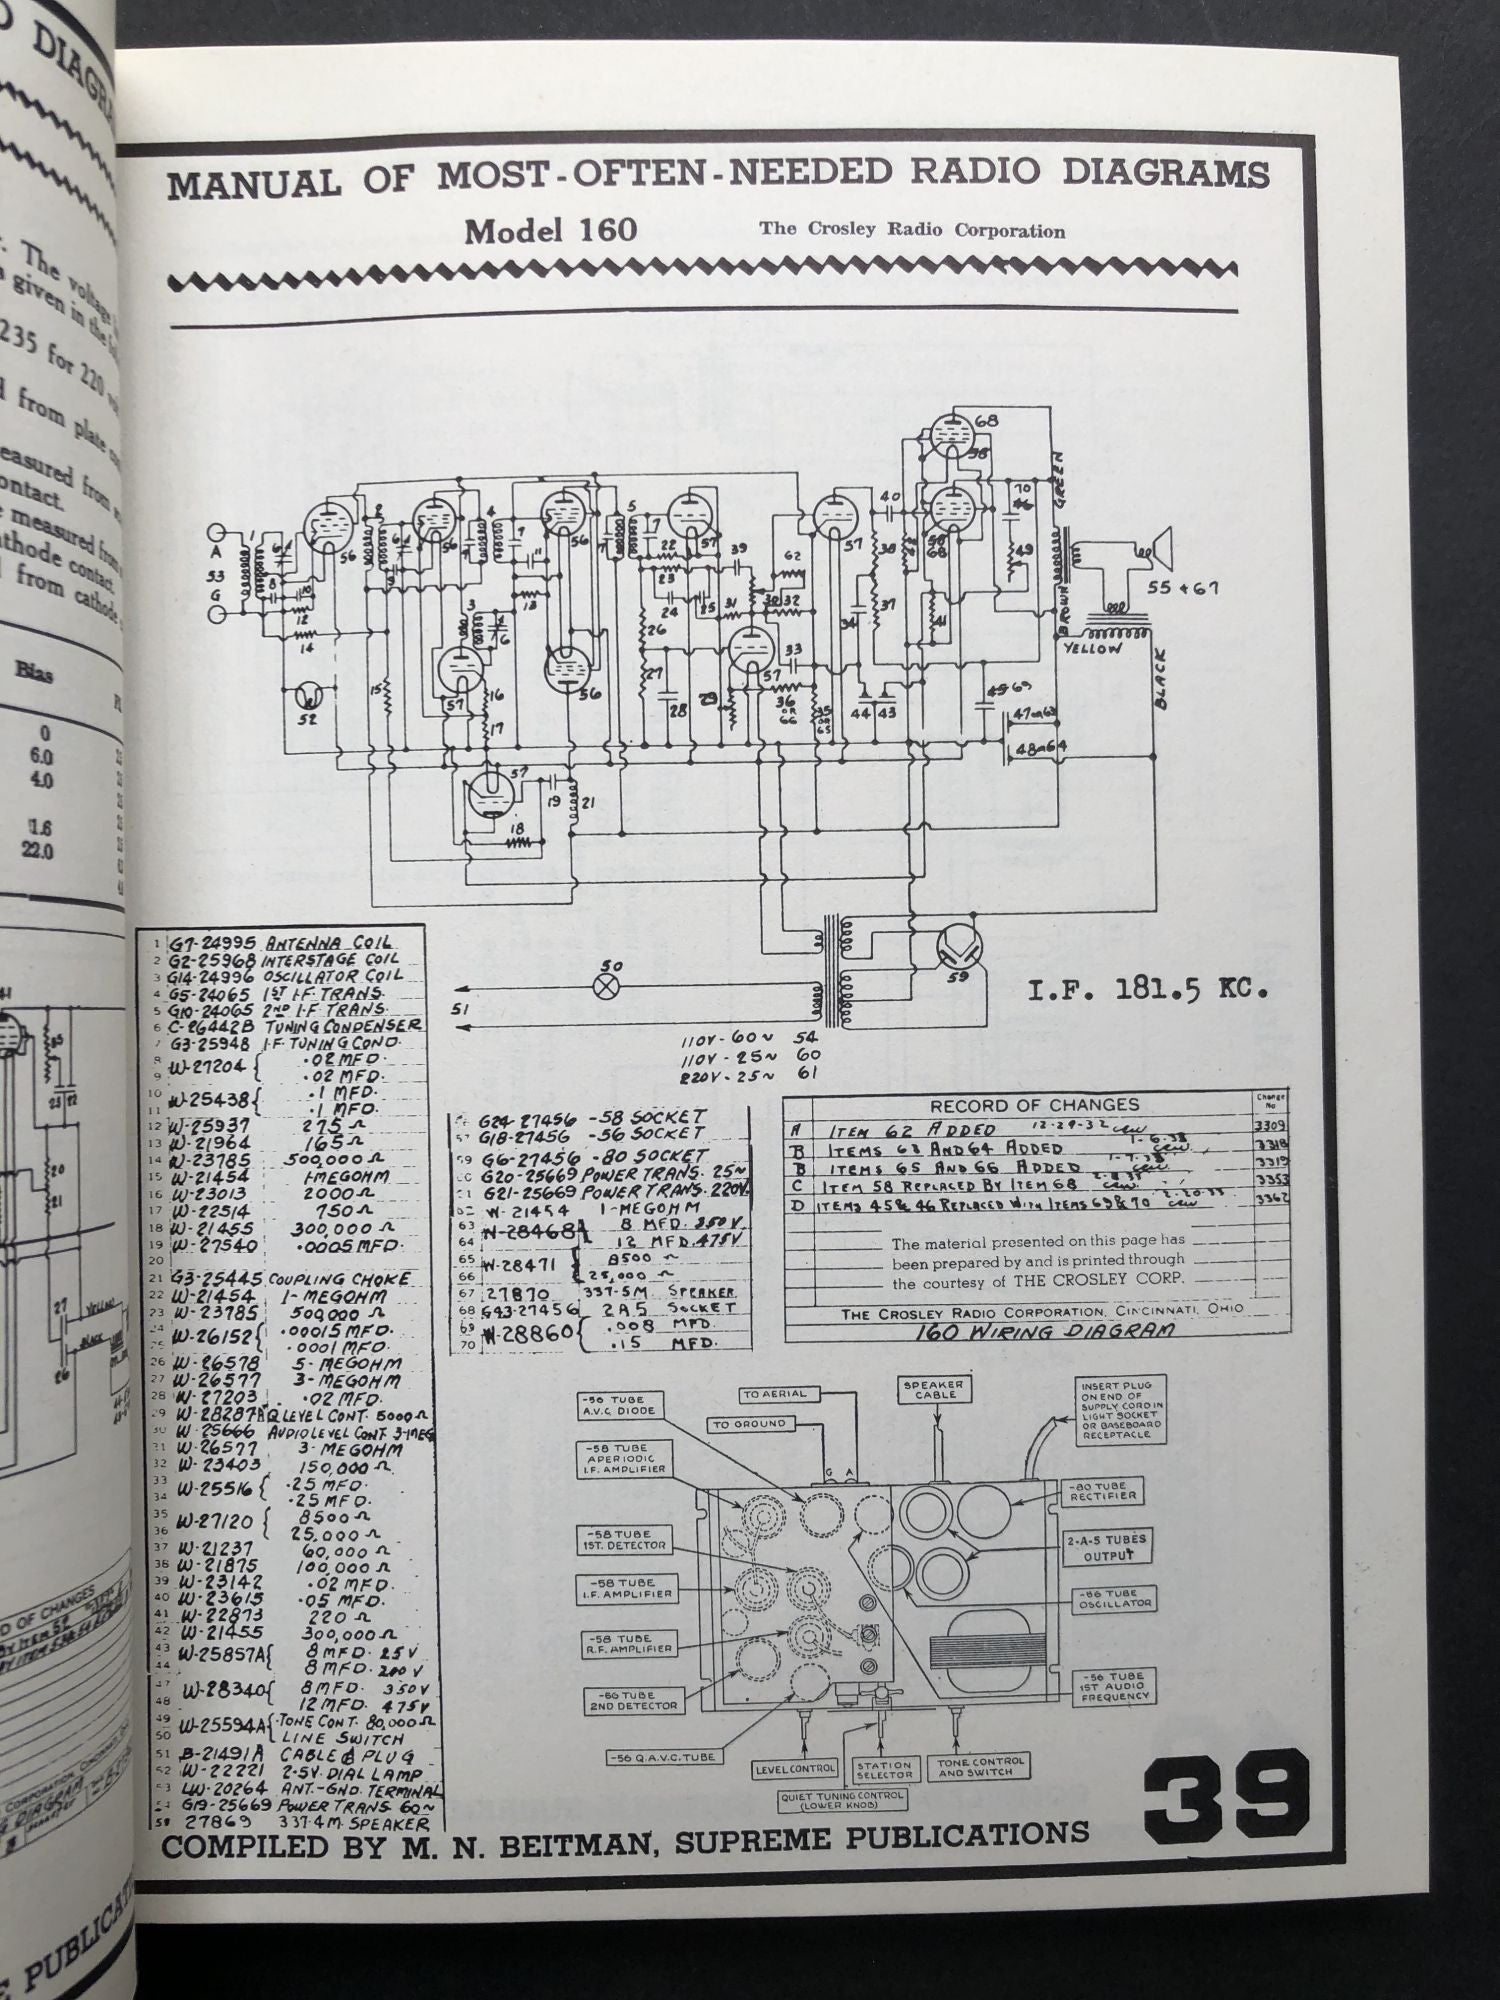 Most Often Needed: 1926-1938 Radio Diagrams and Servicing Information by M.  N. Beitman on Common Crow Books